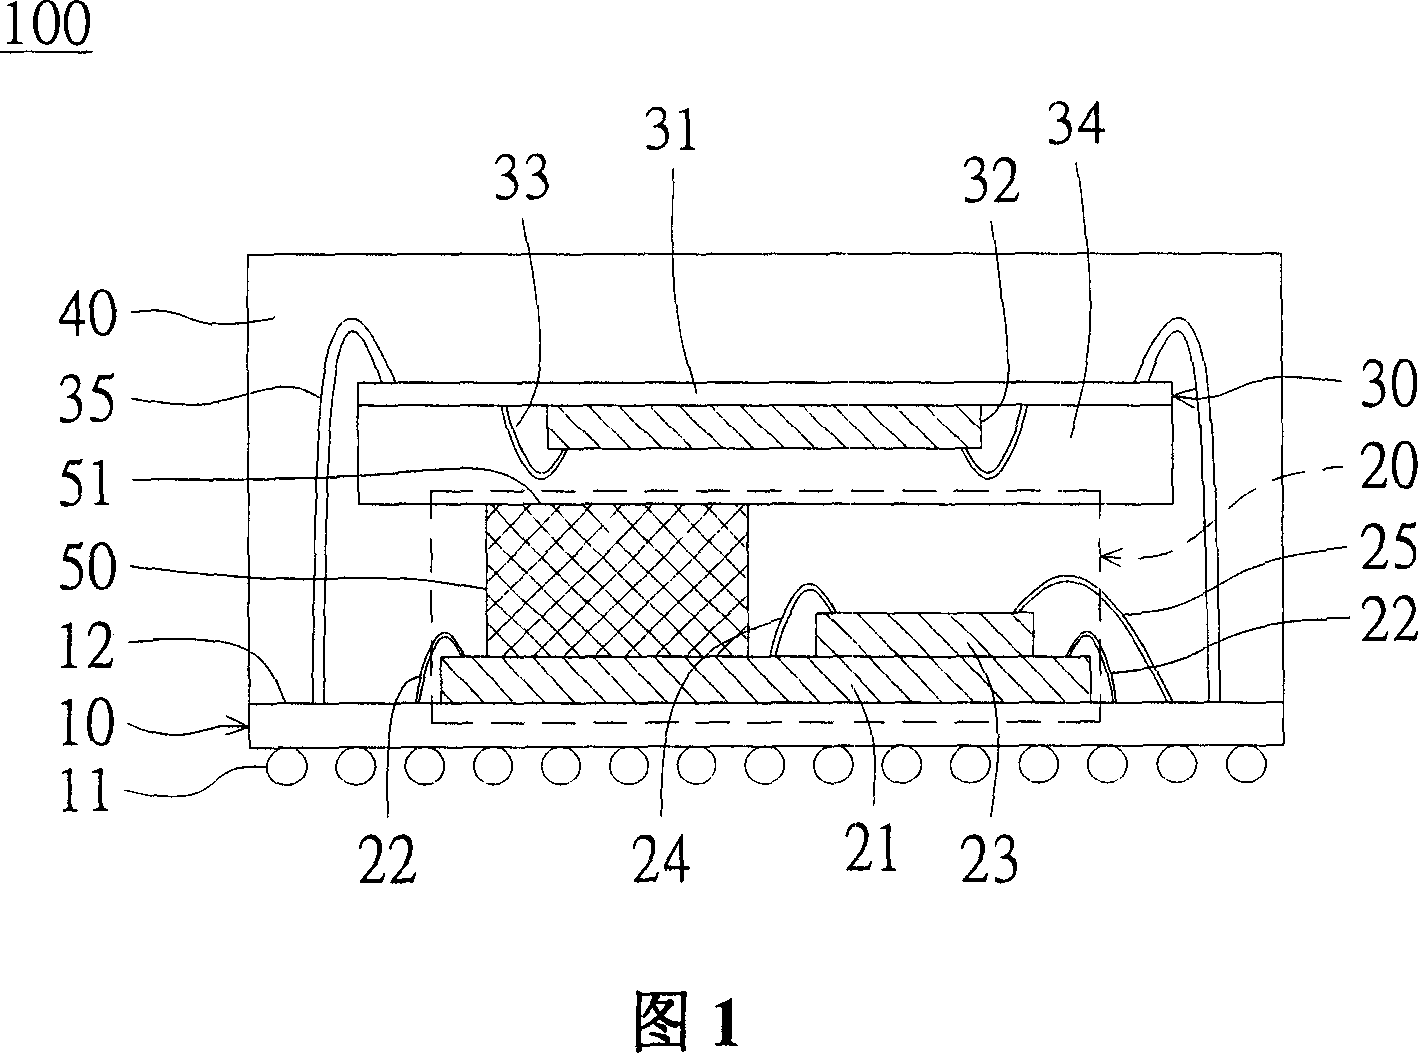 Packing structure with stacking platform